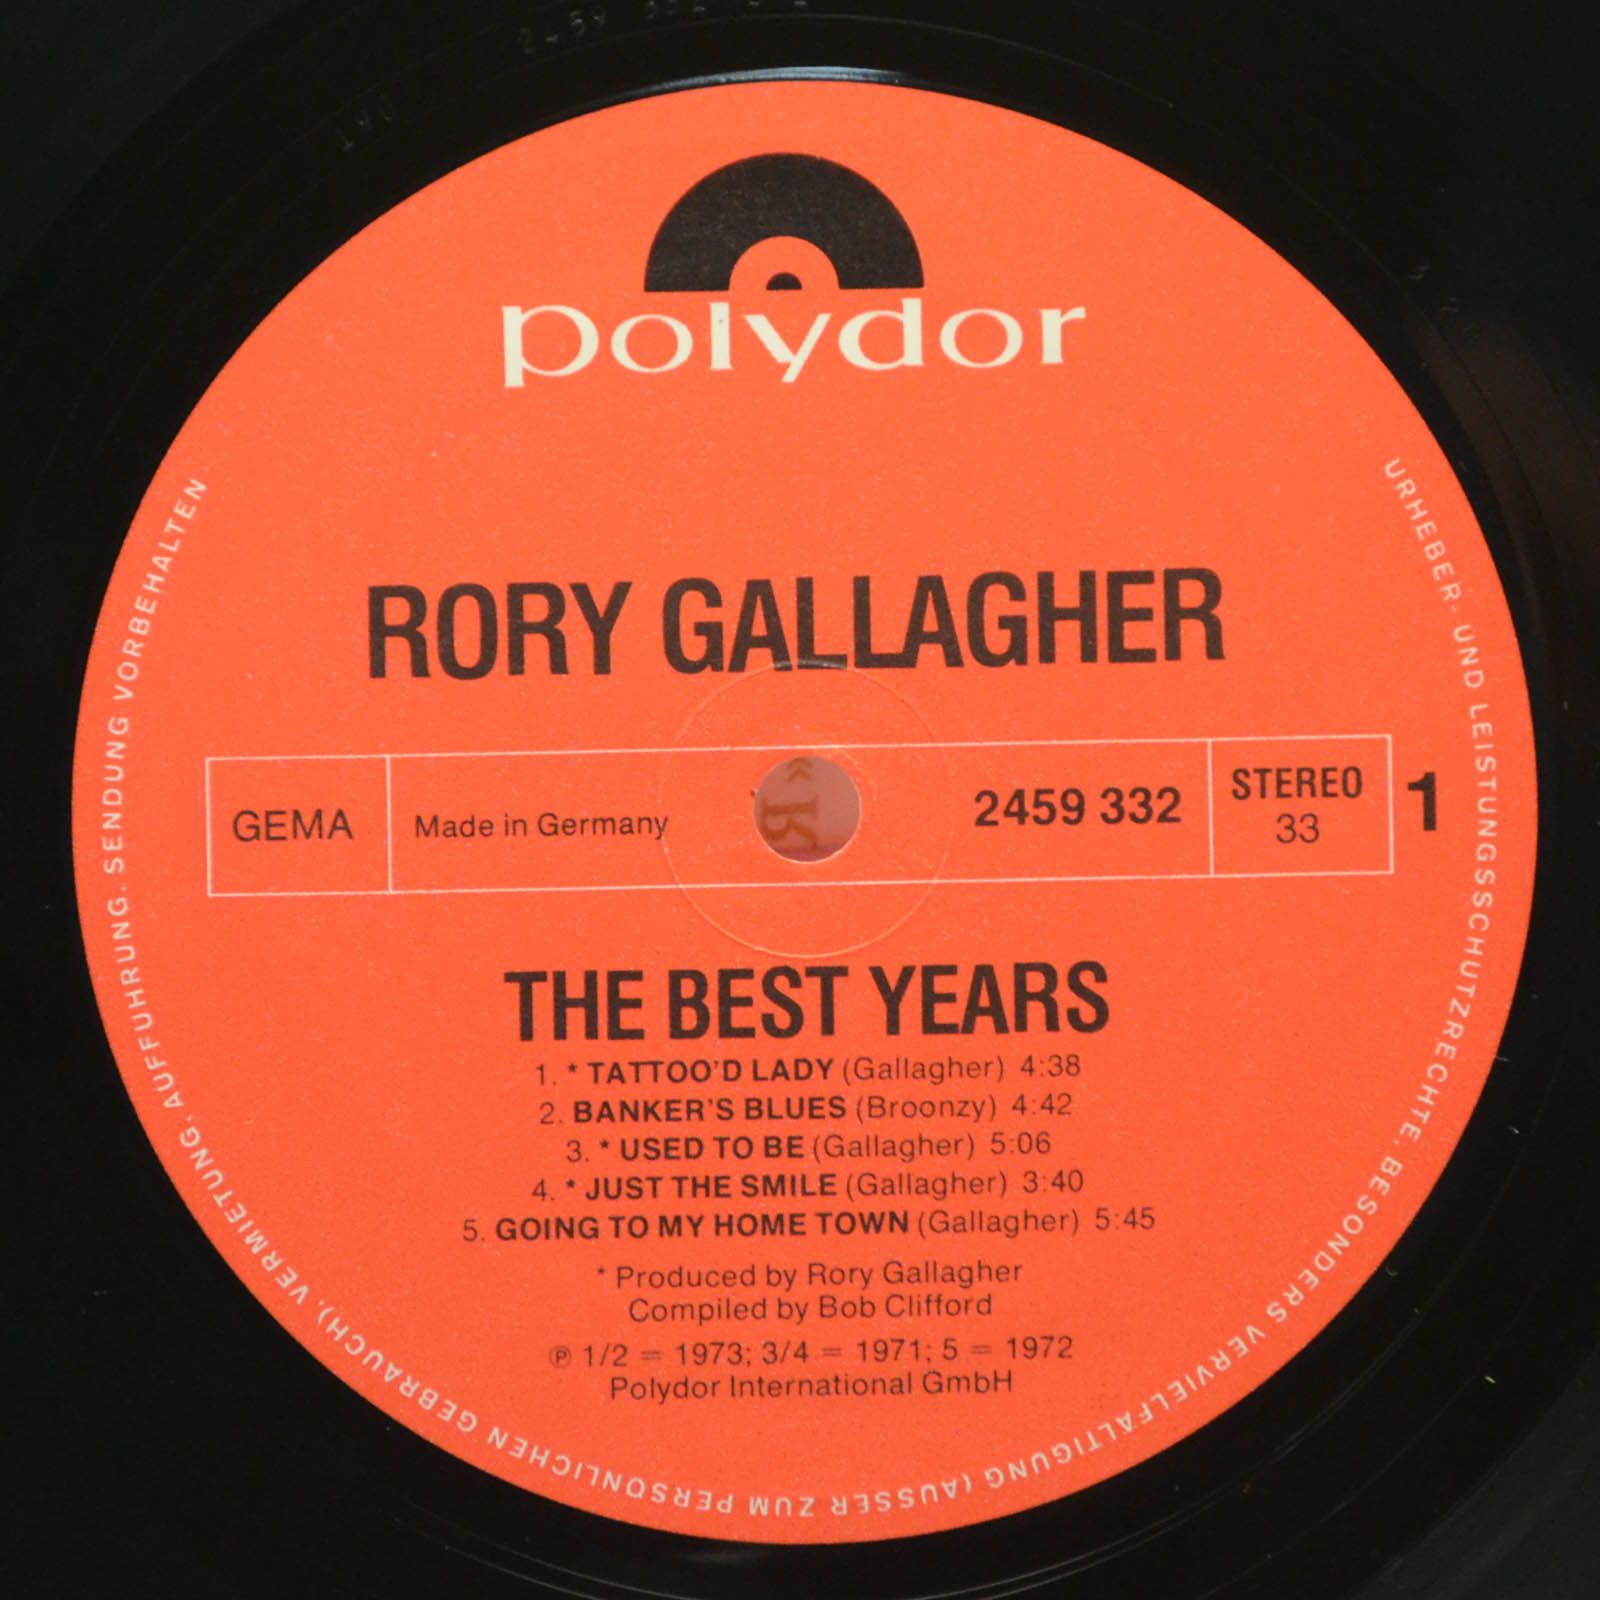 Rory Gallagher — The Best Years, 1977